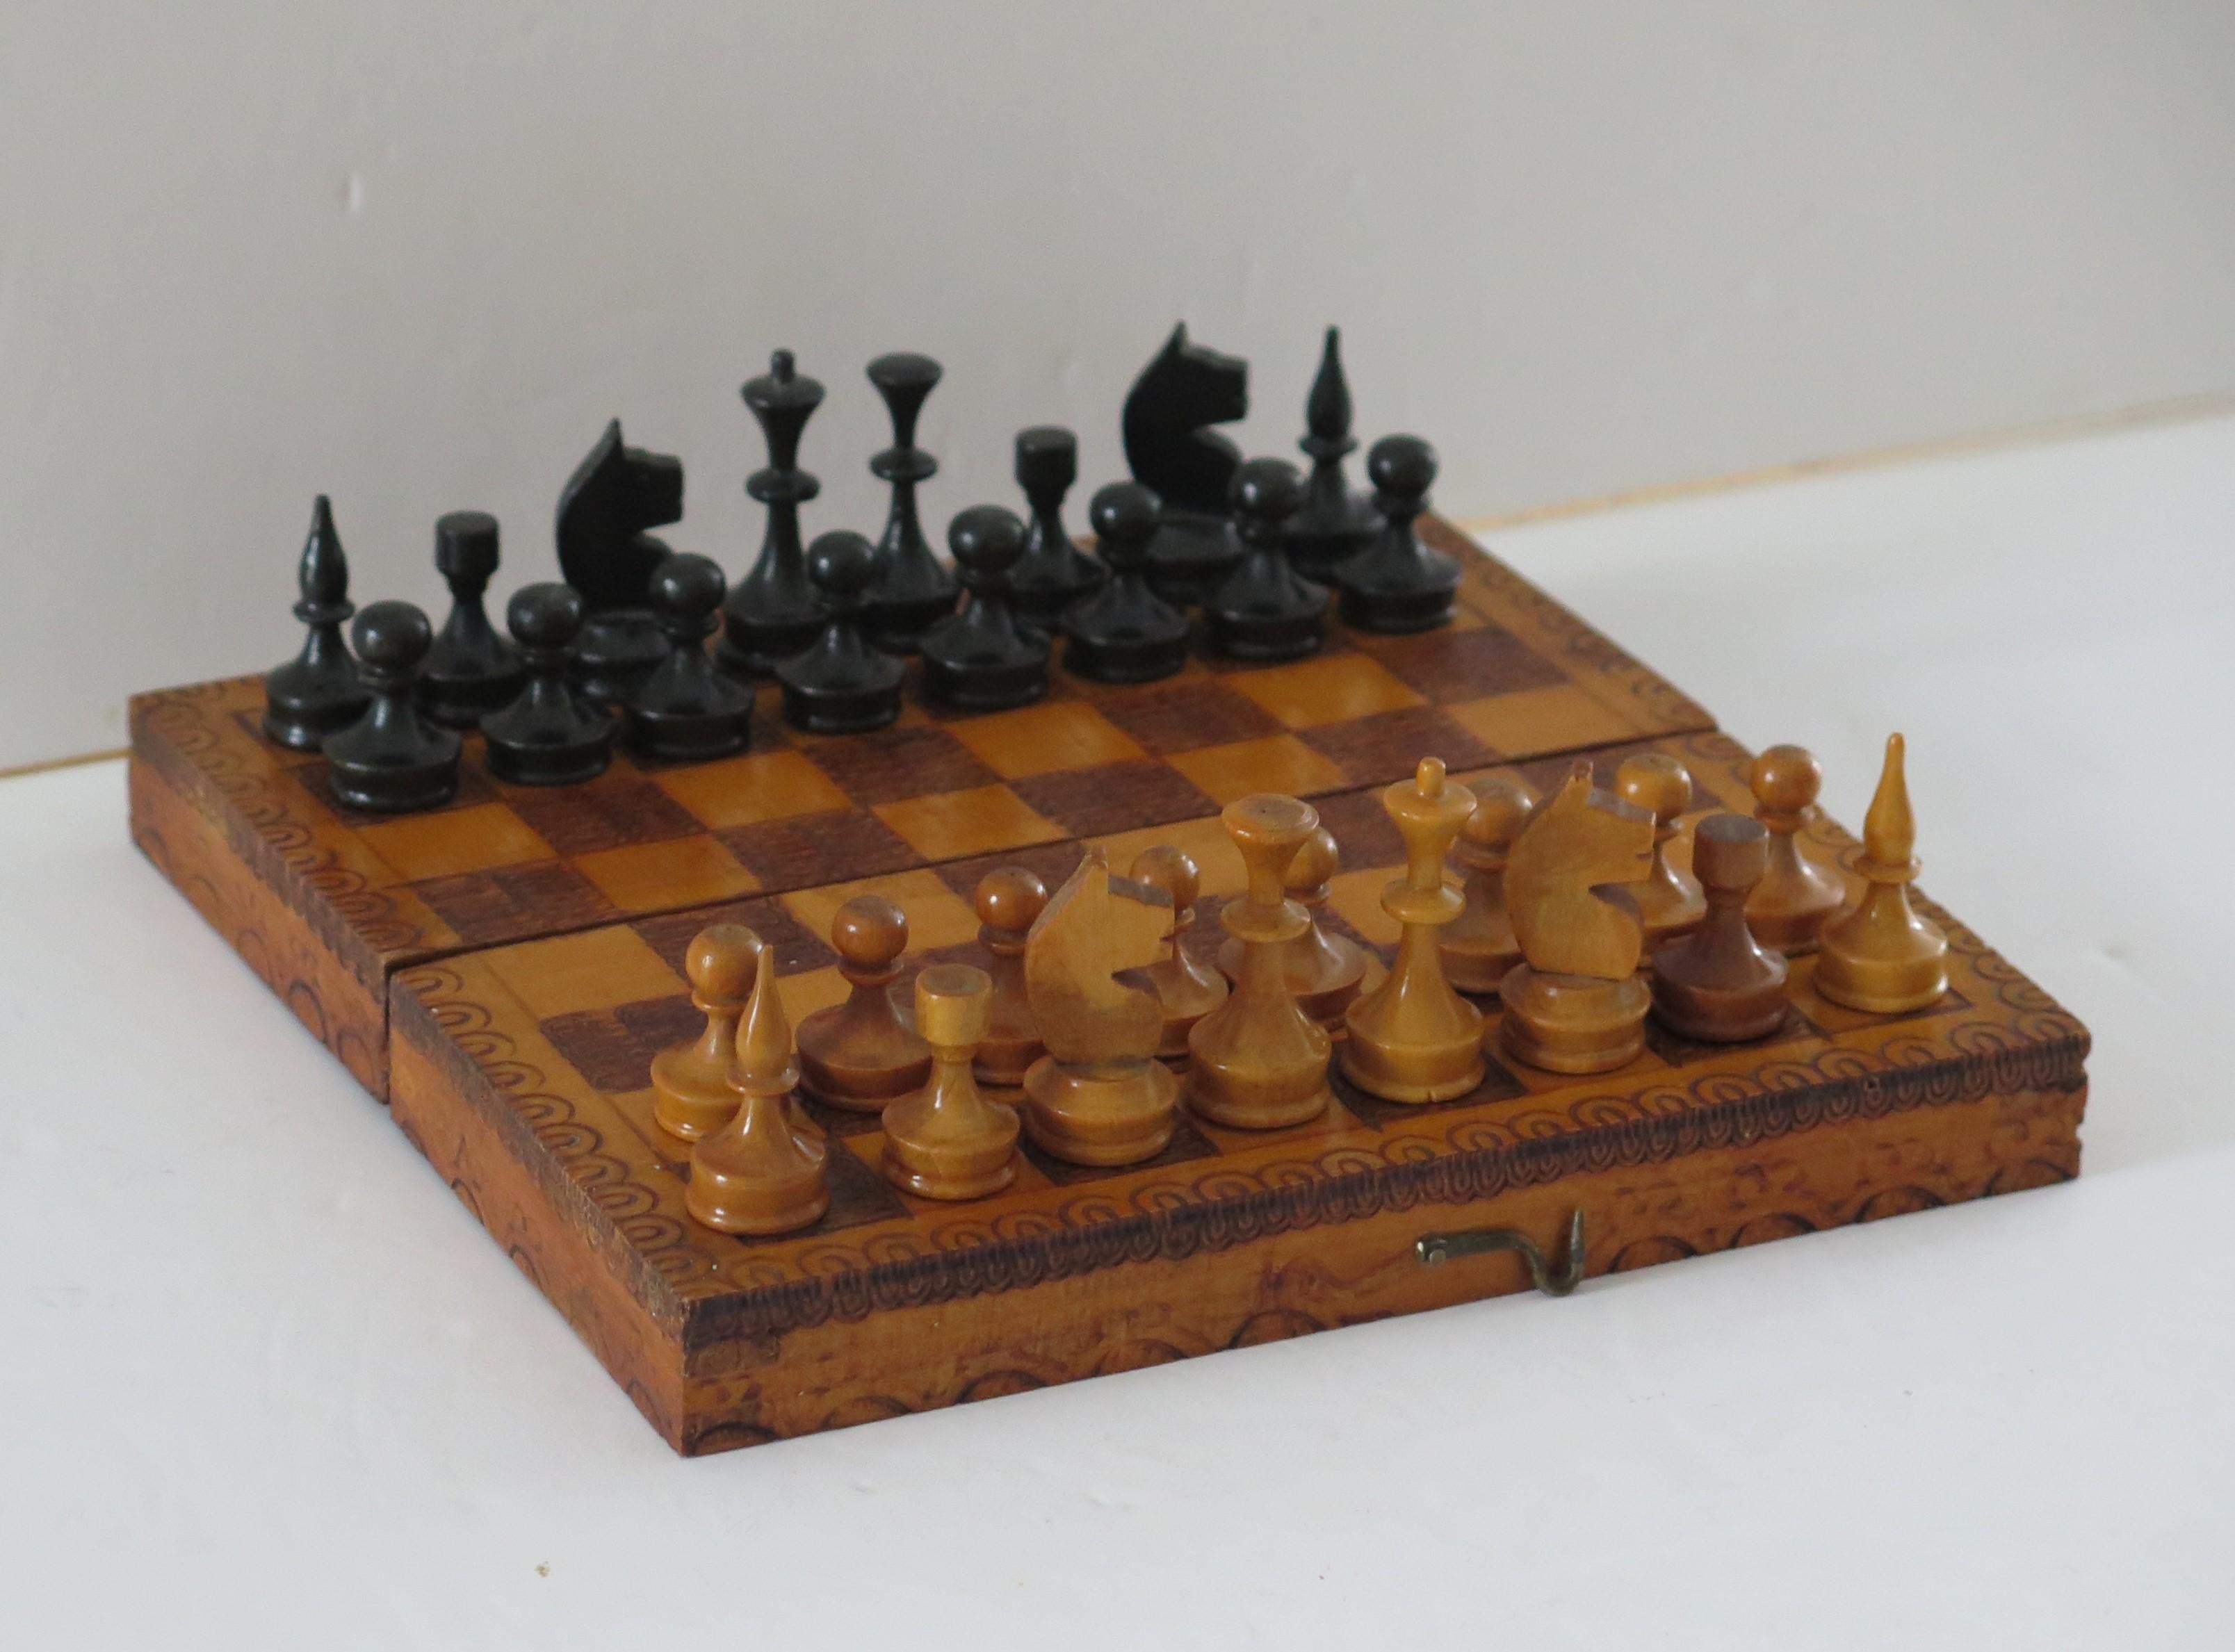 This is a high quality handmade Miniature or travelling wood chess set game of 32 pieces in its own lidded pokerwork decorated box, which we date to the English Edwardian period, circa 1900.

This piece is all handmade. The chess set is complete